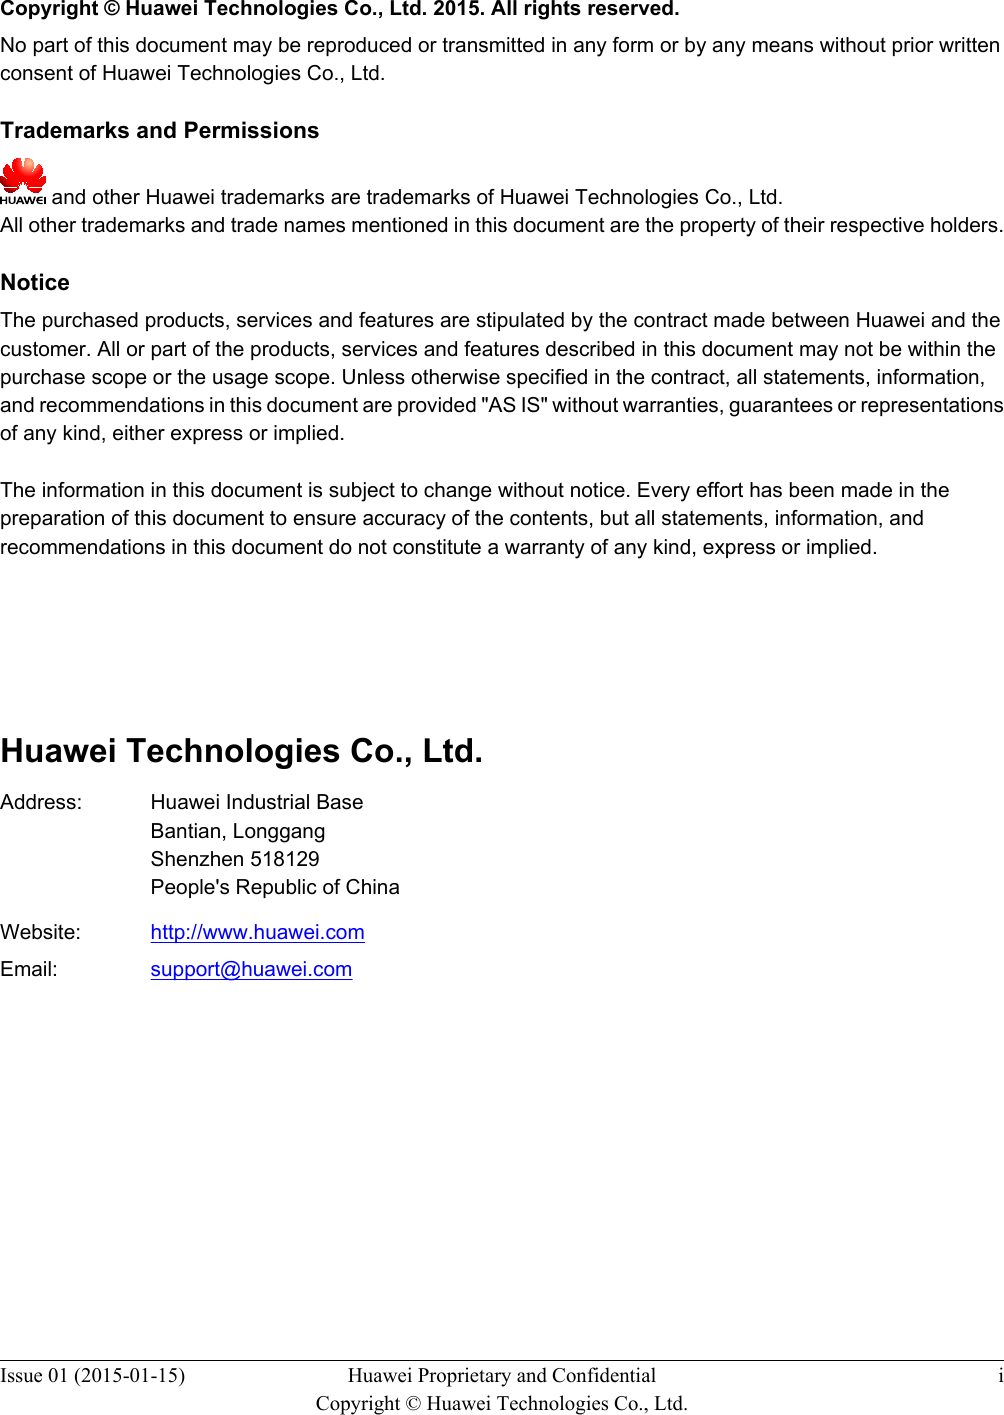   Copyright © Huawei Technologies Co., Ltd. 2015. All rights reserved.No part of this document may be reproduced or transmitted in any form or by any means without prior writtenconsent of Huawei Technologies Co., Ltd. Trademarks and Permissions and other Huawei trademarks are trademarks of Huawei Technologies Co., Ltd.All other trademarks and trade names mentioned in this document are the property of their respective holders. NoticeThe purchased products, services and features are stipulated by the contract made between Huawei and thecustomer. All or part of the products, services and features described in this document may not be within thepurchase scope or the usage scope. Unless otherwise specified in the contract, all statements, information,and recommendations in this document are provided &quot;AS IS&quot; without warranties, guarantees or representationsof any kind, either express or implied.The information in this document is subject to change without notice. Every effort has been made in thepreparation of this document to ensure accuracy of the contents, but all statements, information, andrecommendations in this document do not constitute a warranty of any kind, express or implied.       Huawei Technologies Co., Ltd.Address: Huawei Industrial BaseBantian, LonggangShenzhen 518129People&apos;s Republic of ChinaWebsite: http://www.huawei.comEmail: support@huawei.comIssue 01 (2015-01-15) Huawei Proprietary and ConfidentialCopyright © Huawei Technologies Co., Ltd.i